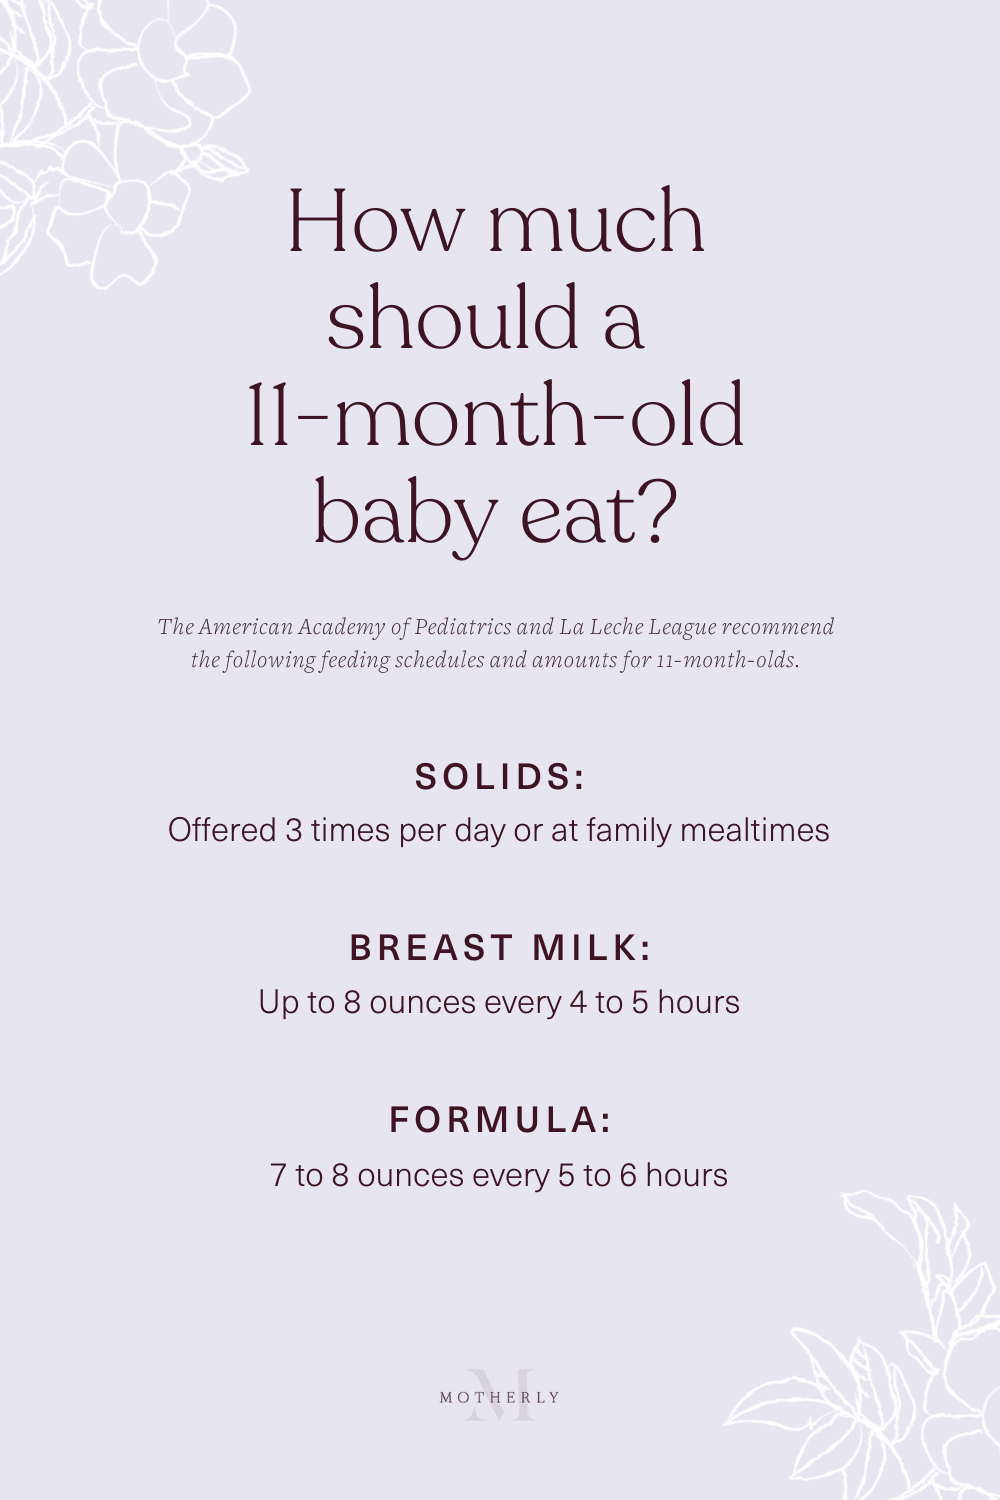 printable summary of 11-month-old baby feeding schedule - breast milk and formula